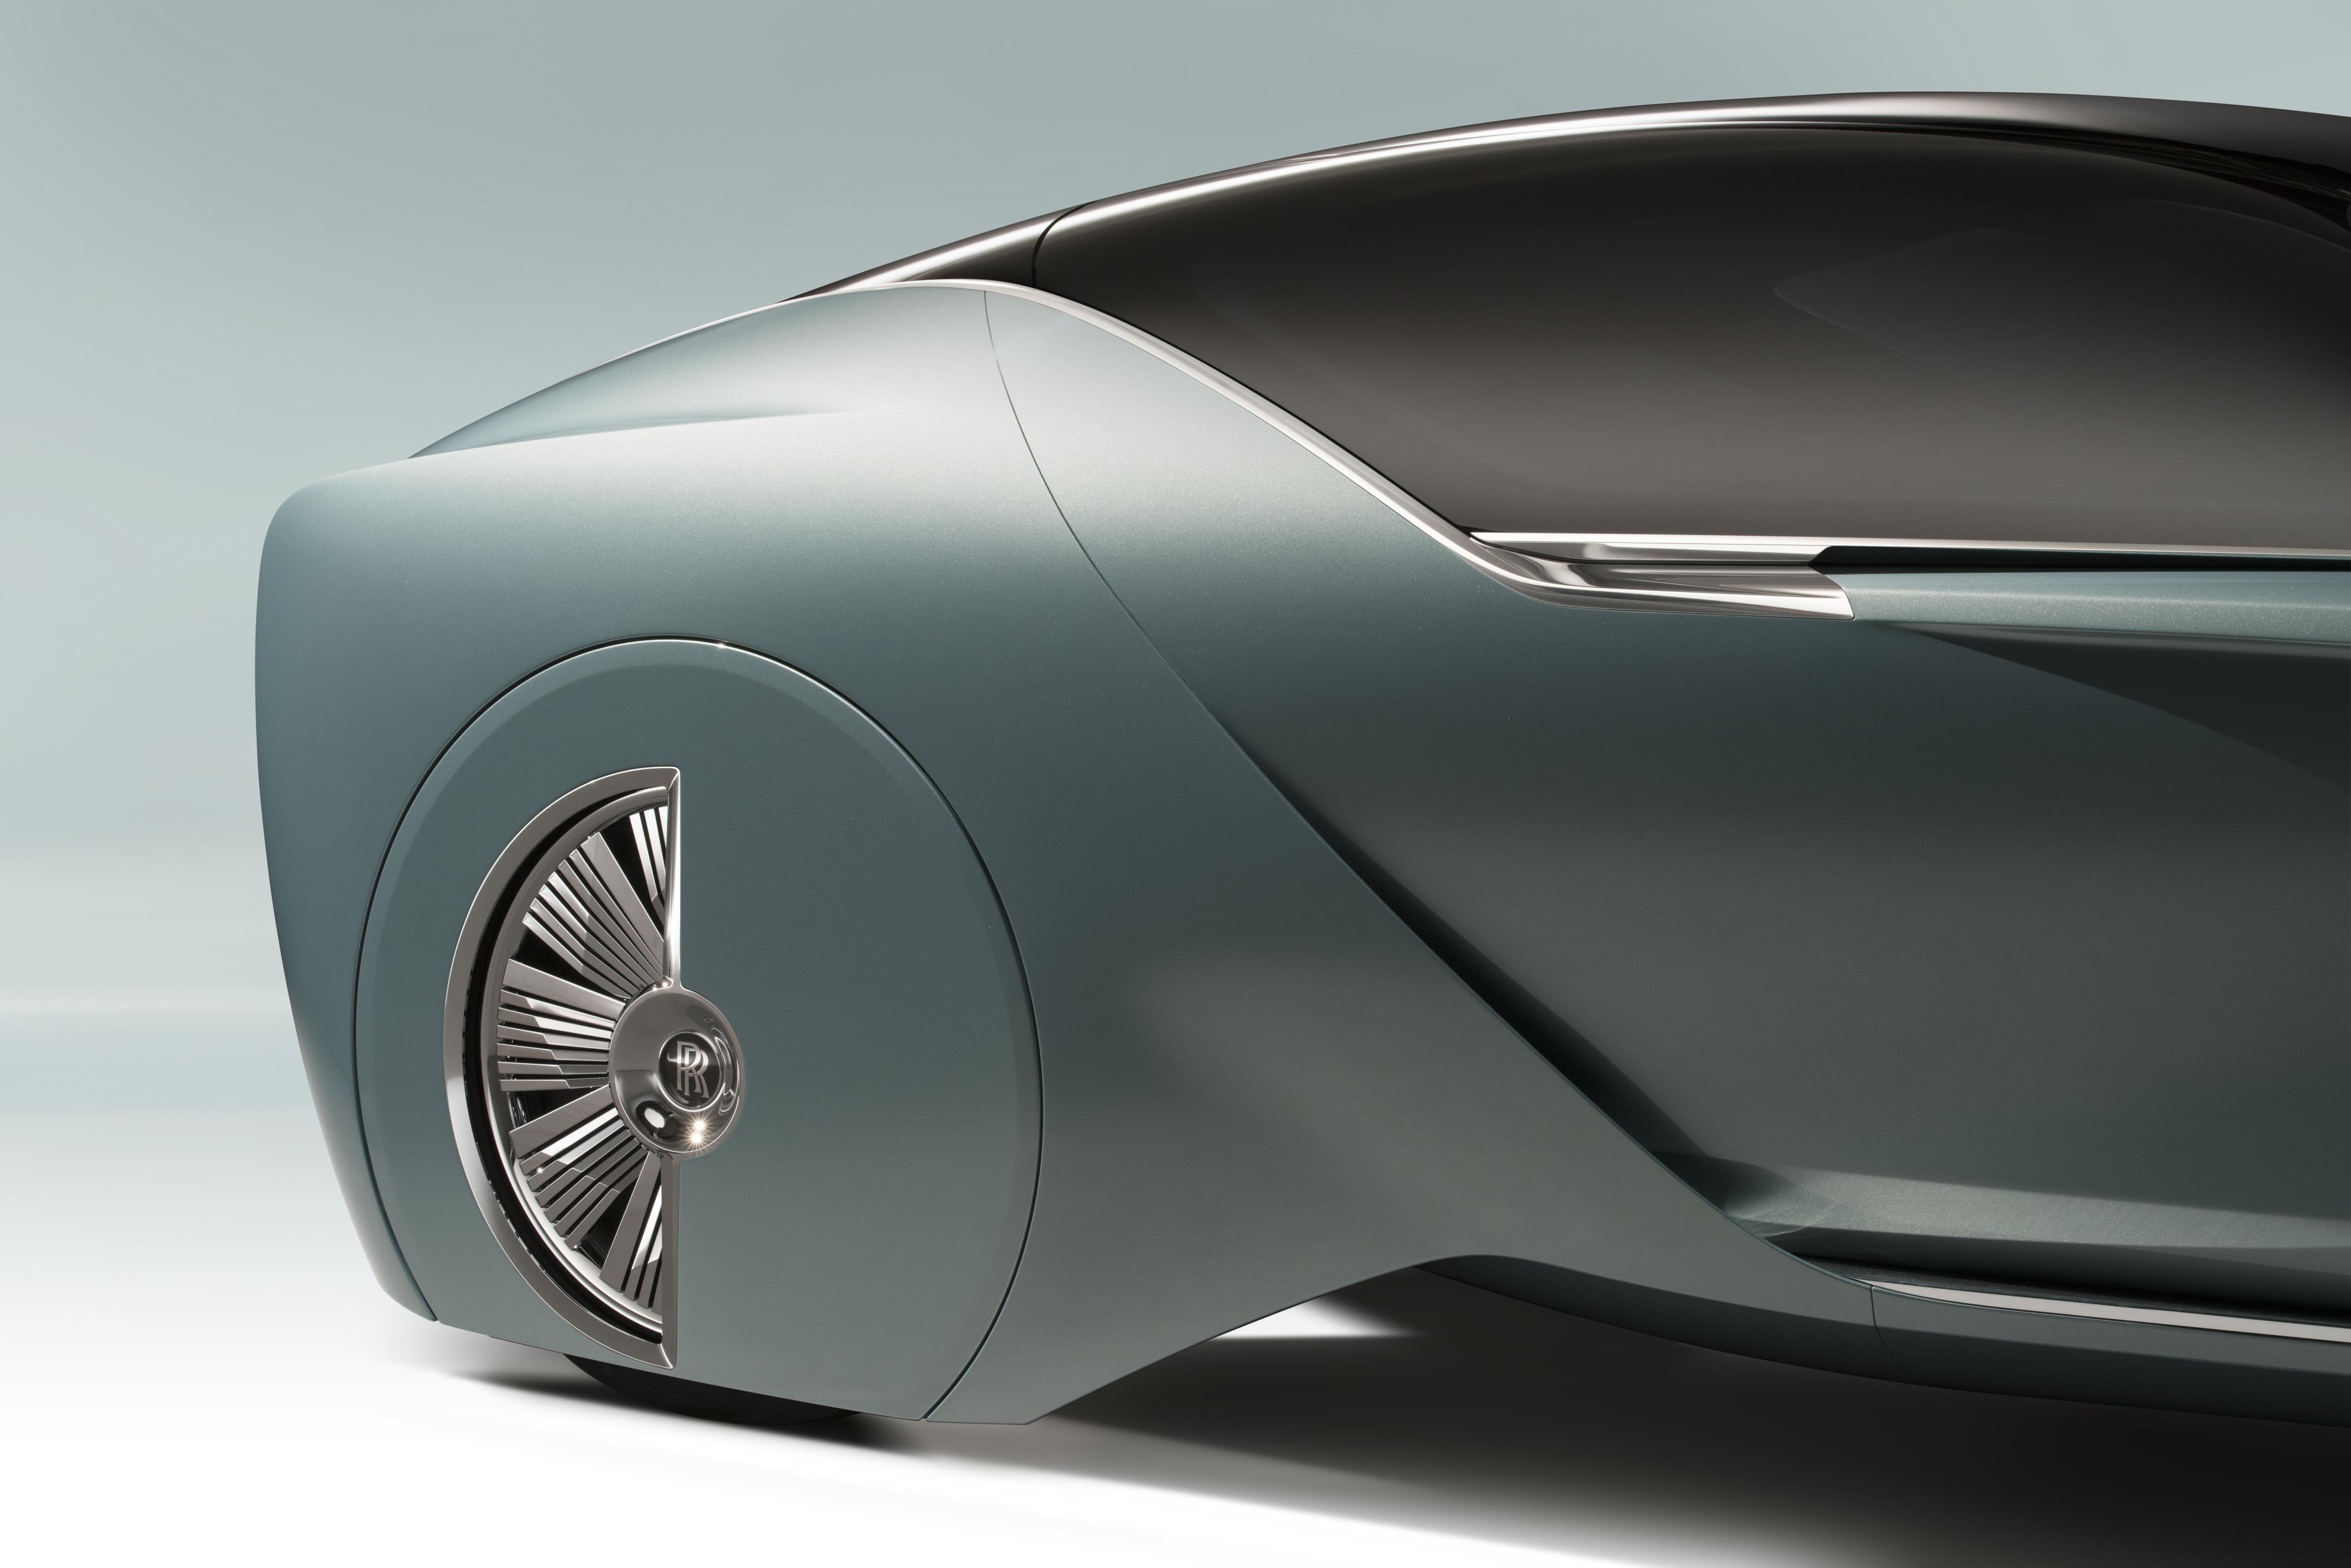 83 Rolls Royce Vision Next 100 Stock Photos HighRes Pictures and Images   Getty Images